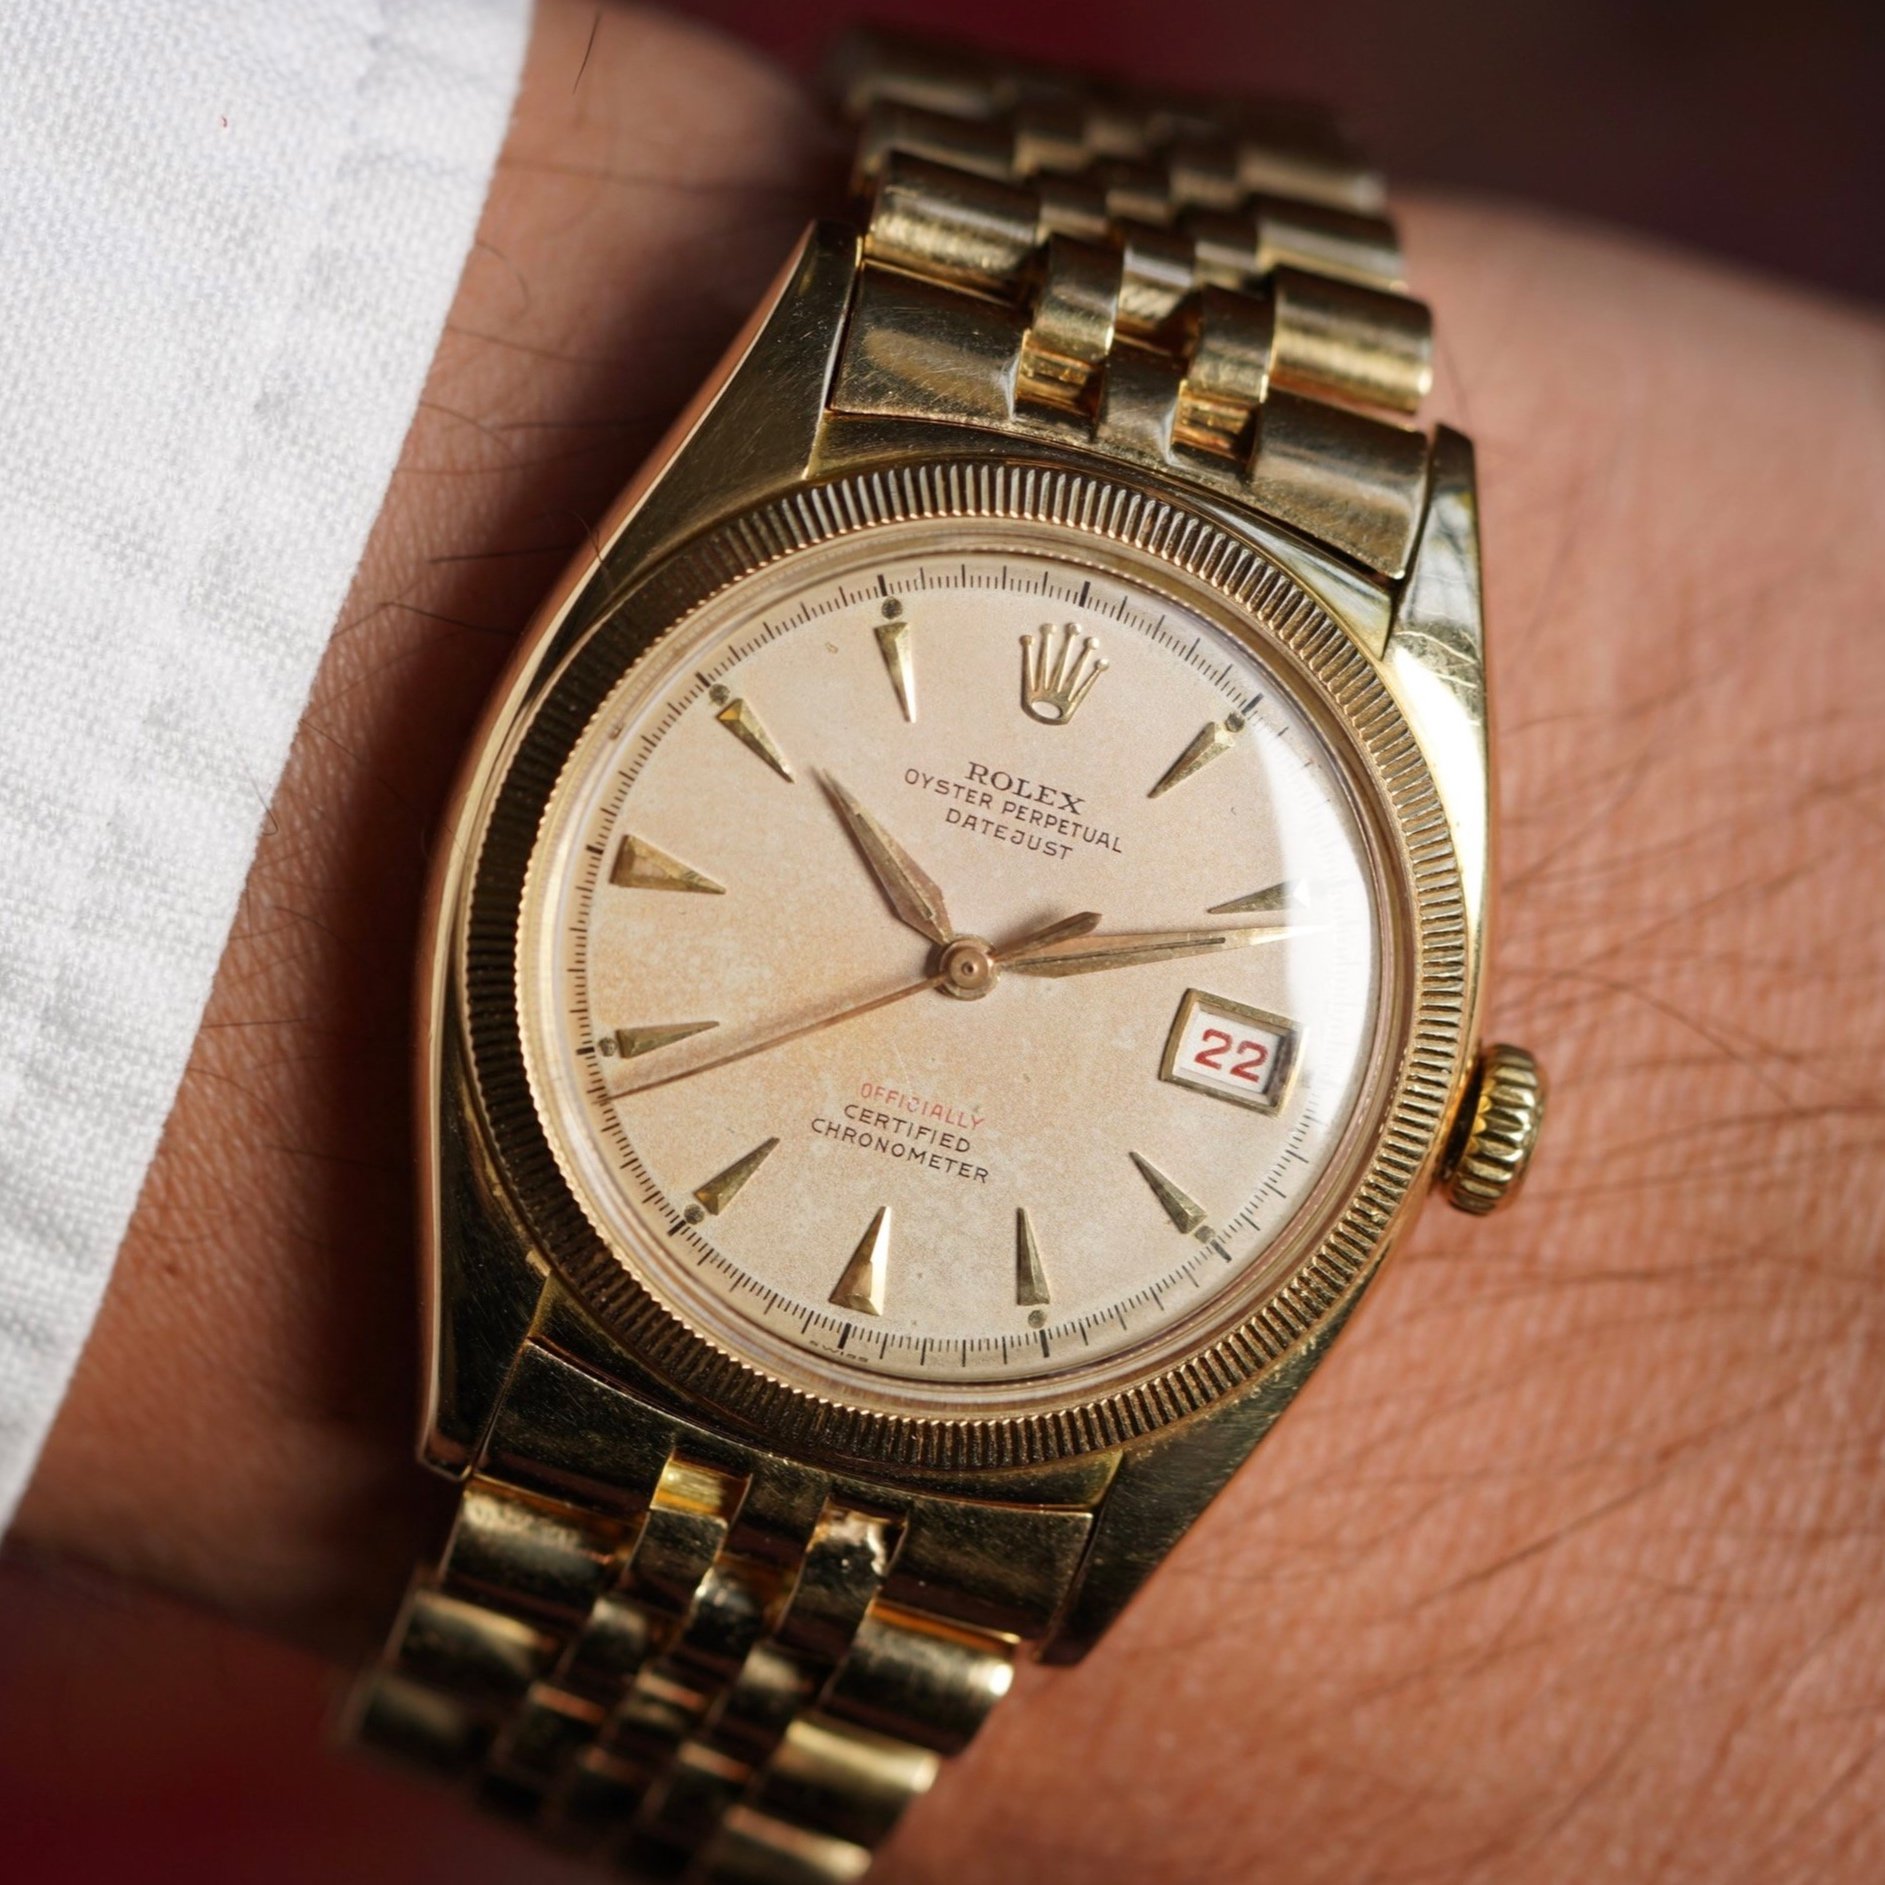 Rolex Datejust Reference 6105 in 18K Yellow Gold w/ Papers